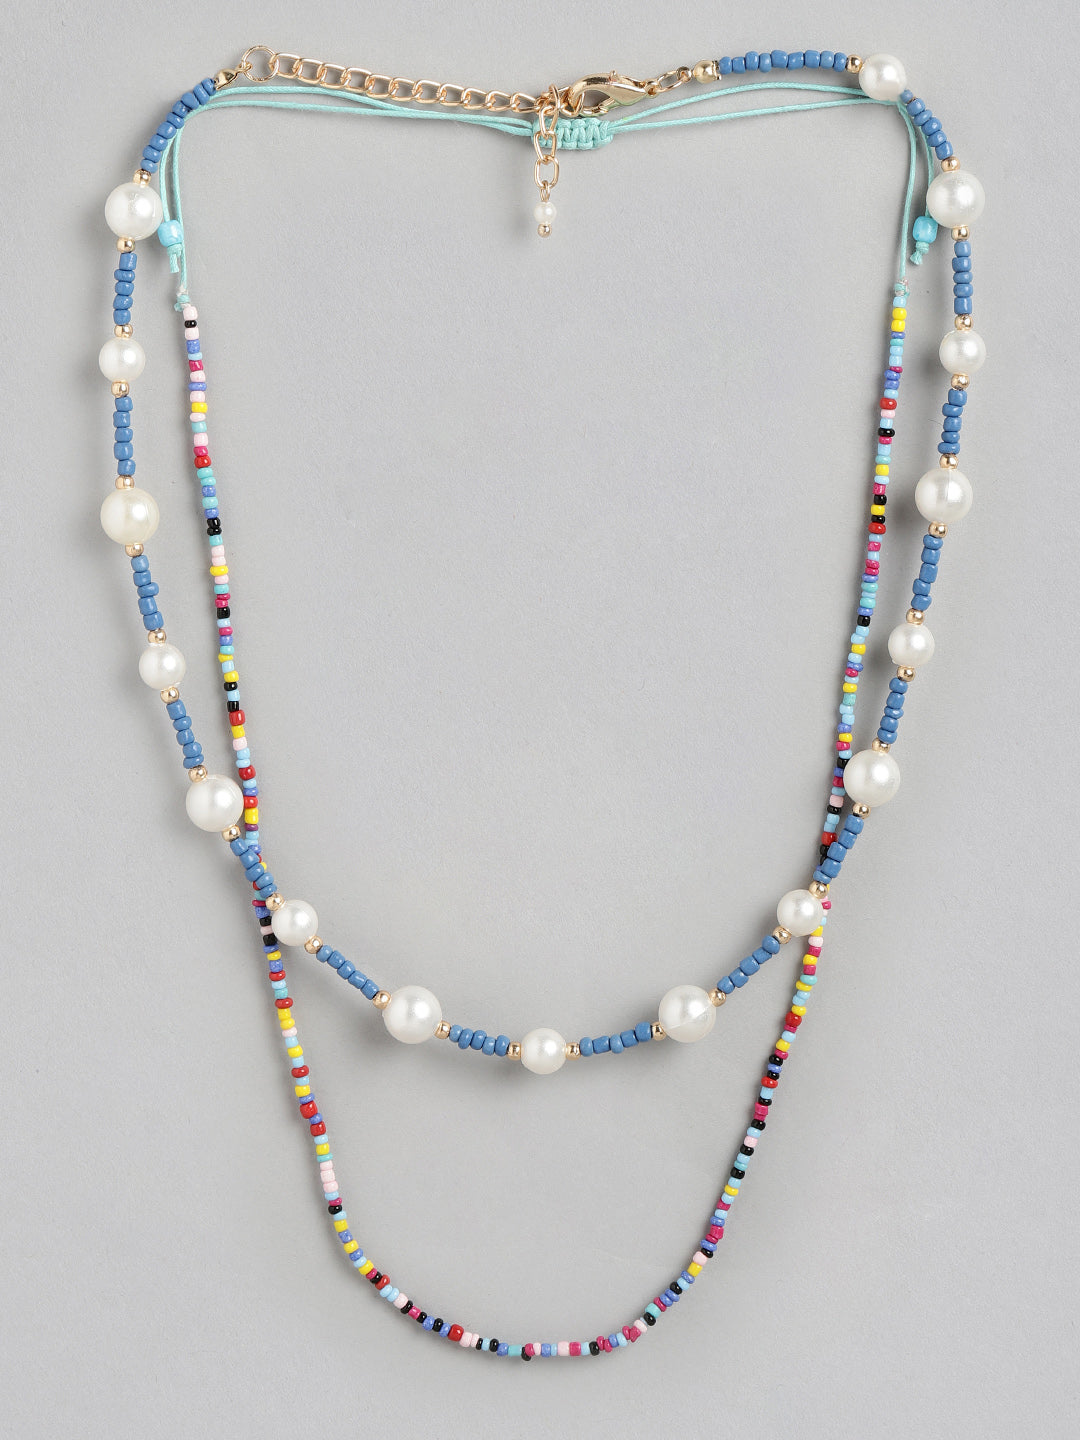 Blueberry Piper pearl necklace